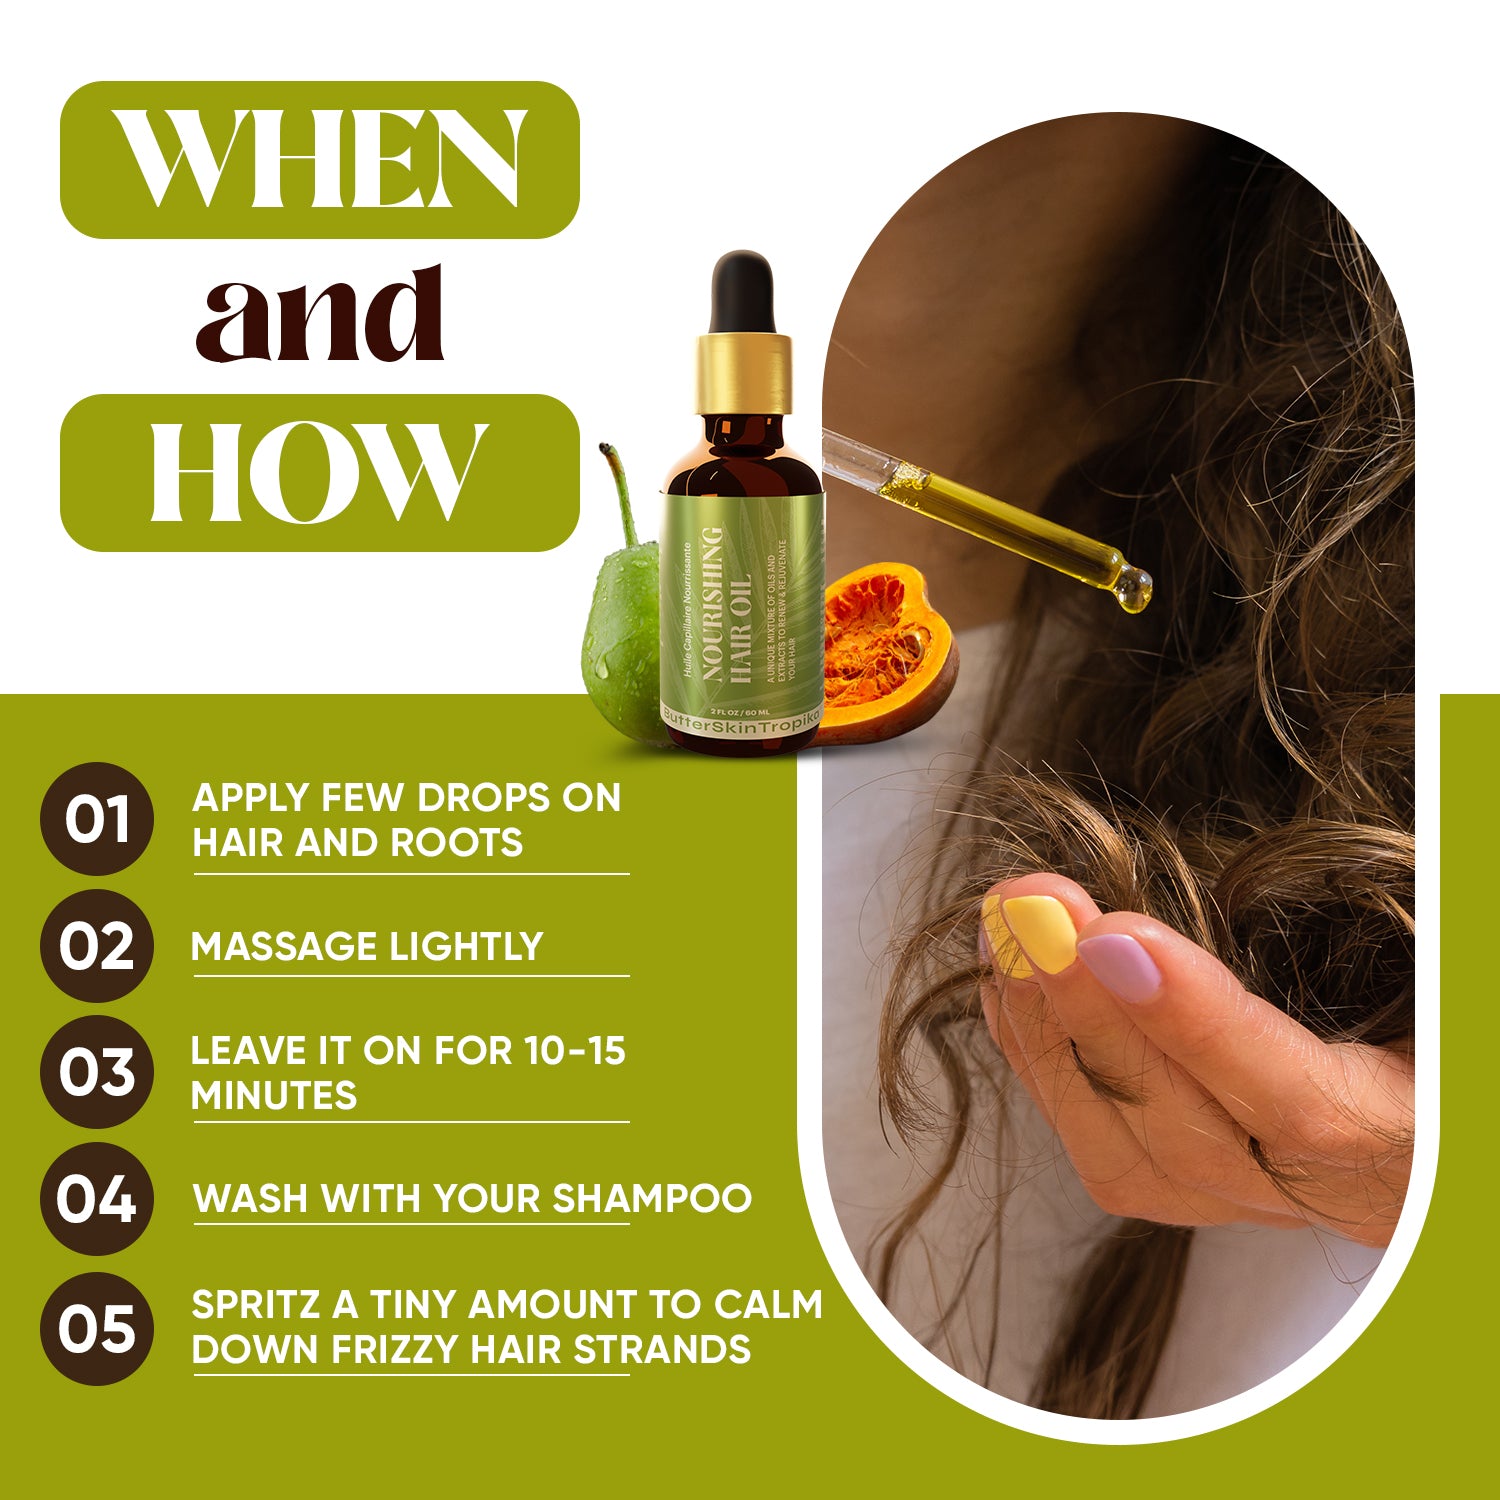 Nourishing Hair Oil   -  A unique mixture of oils and extracts to renew & rejuvenate your hair